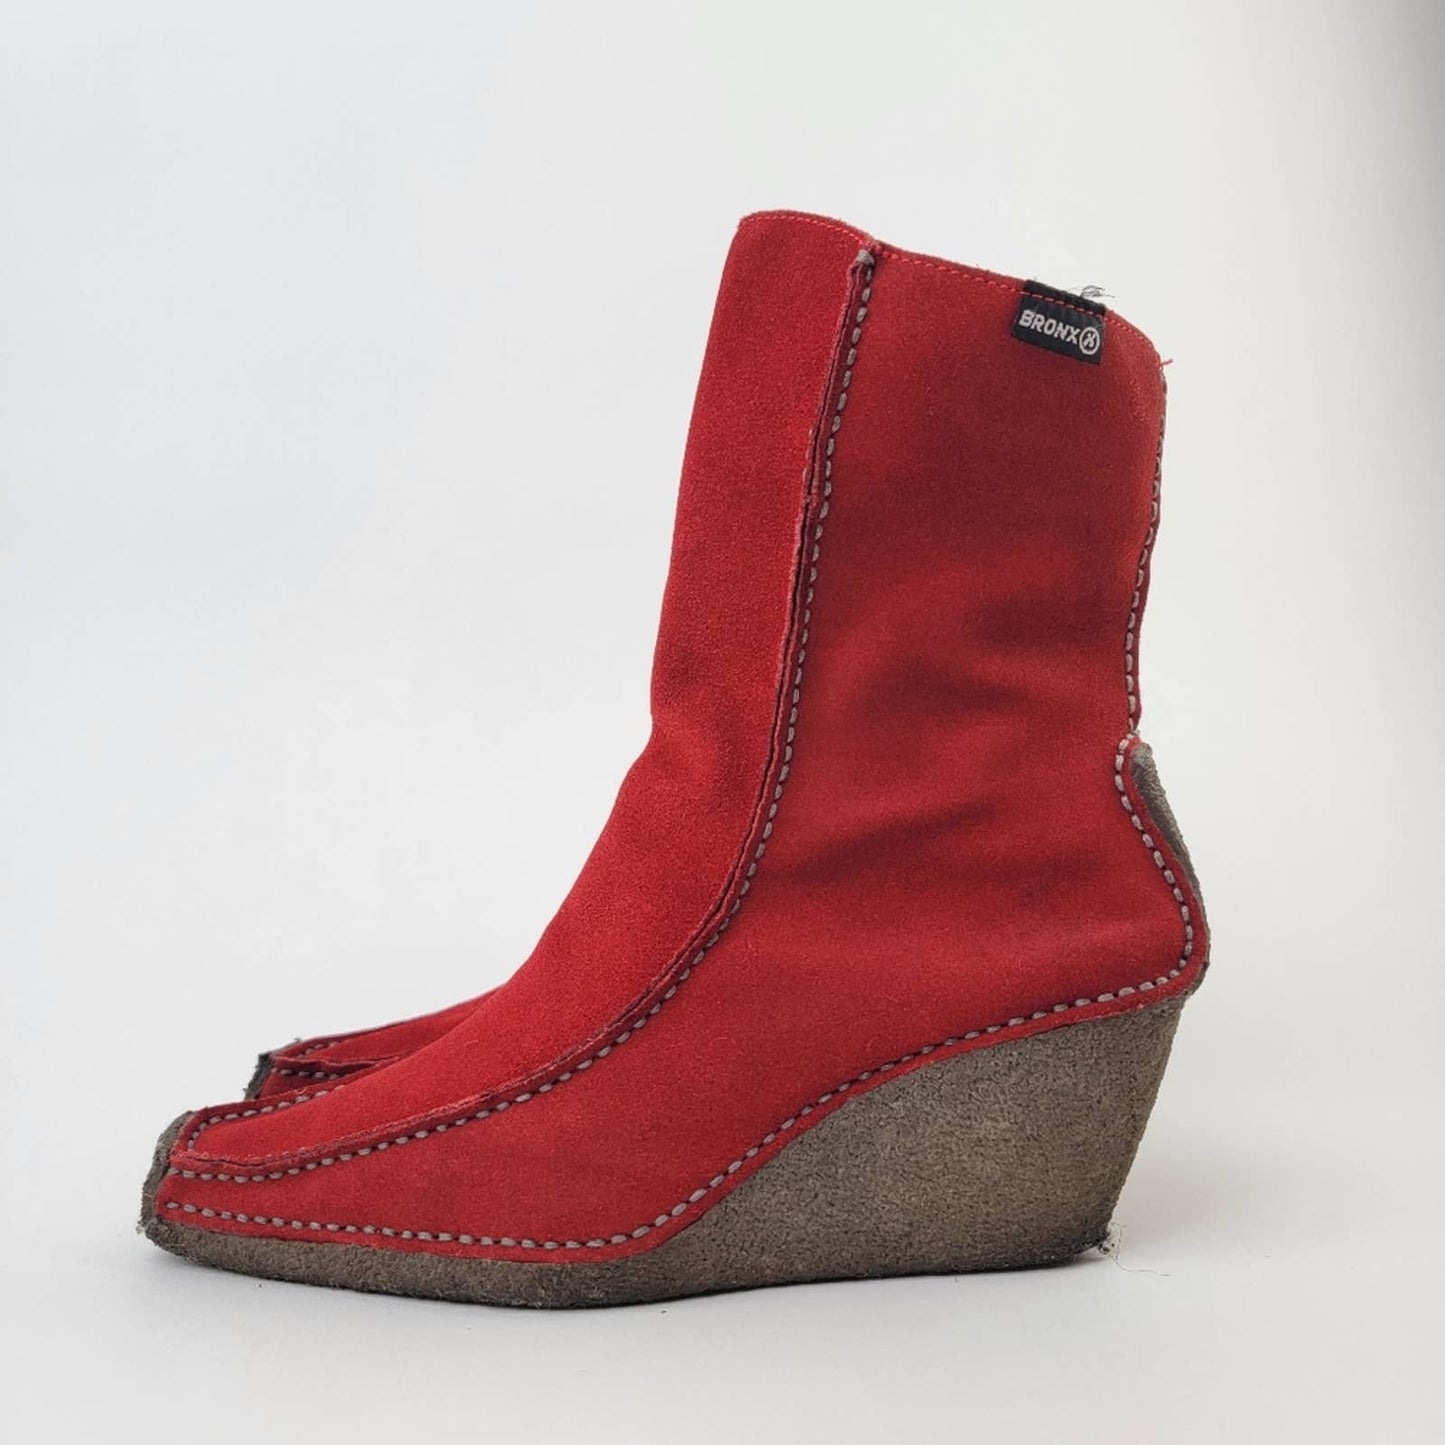 BRONX Red Suede Leather Slip On Snipped Toe Chelsea Wedge Boots - 9